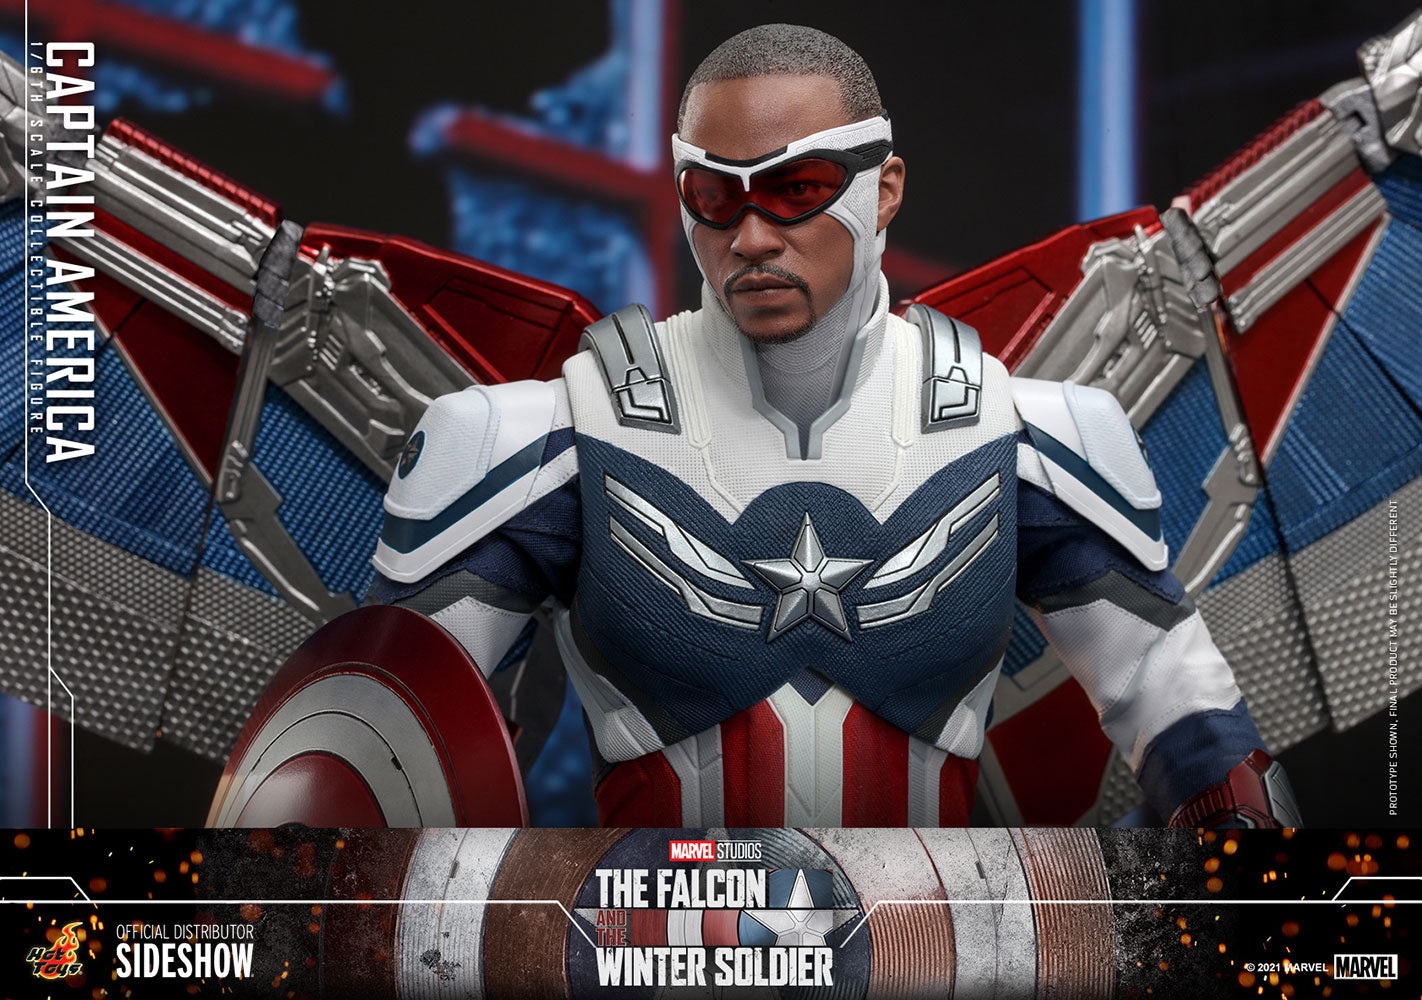 Captain America (Falcon & the Winter Soldier) Marvel 1:6 Figure by Hot Toys